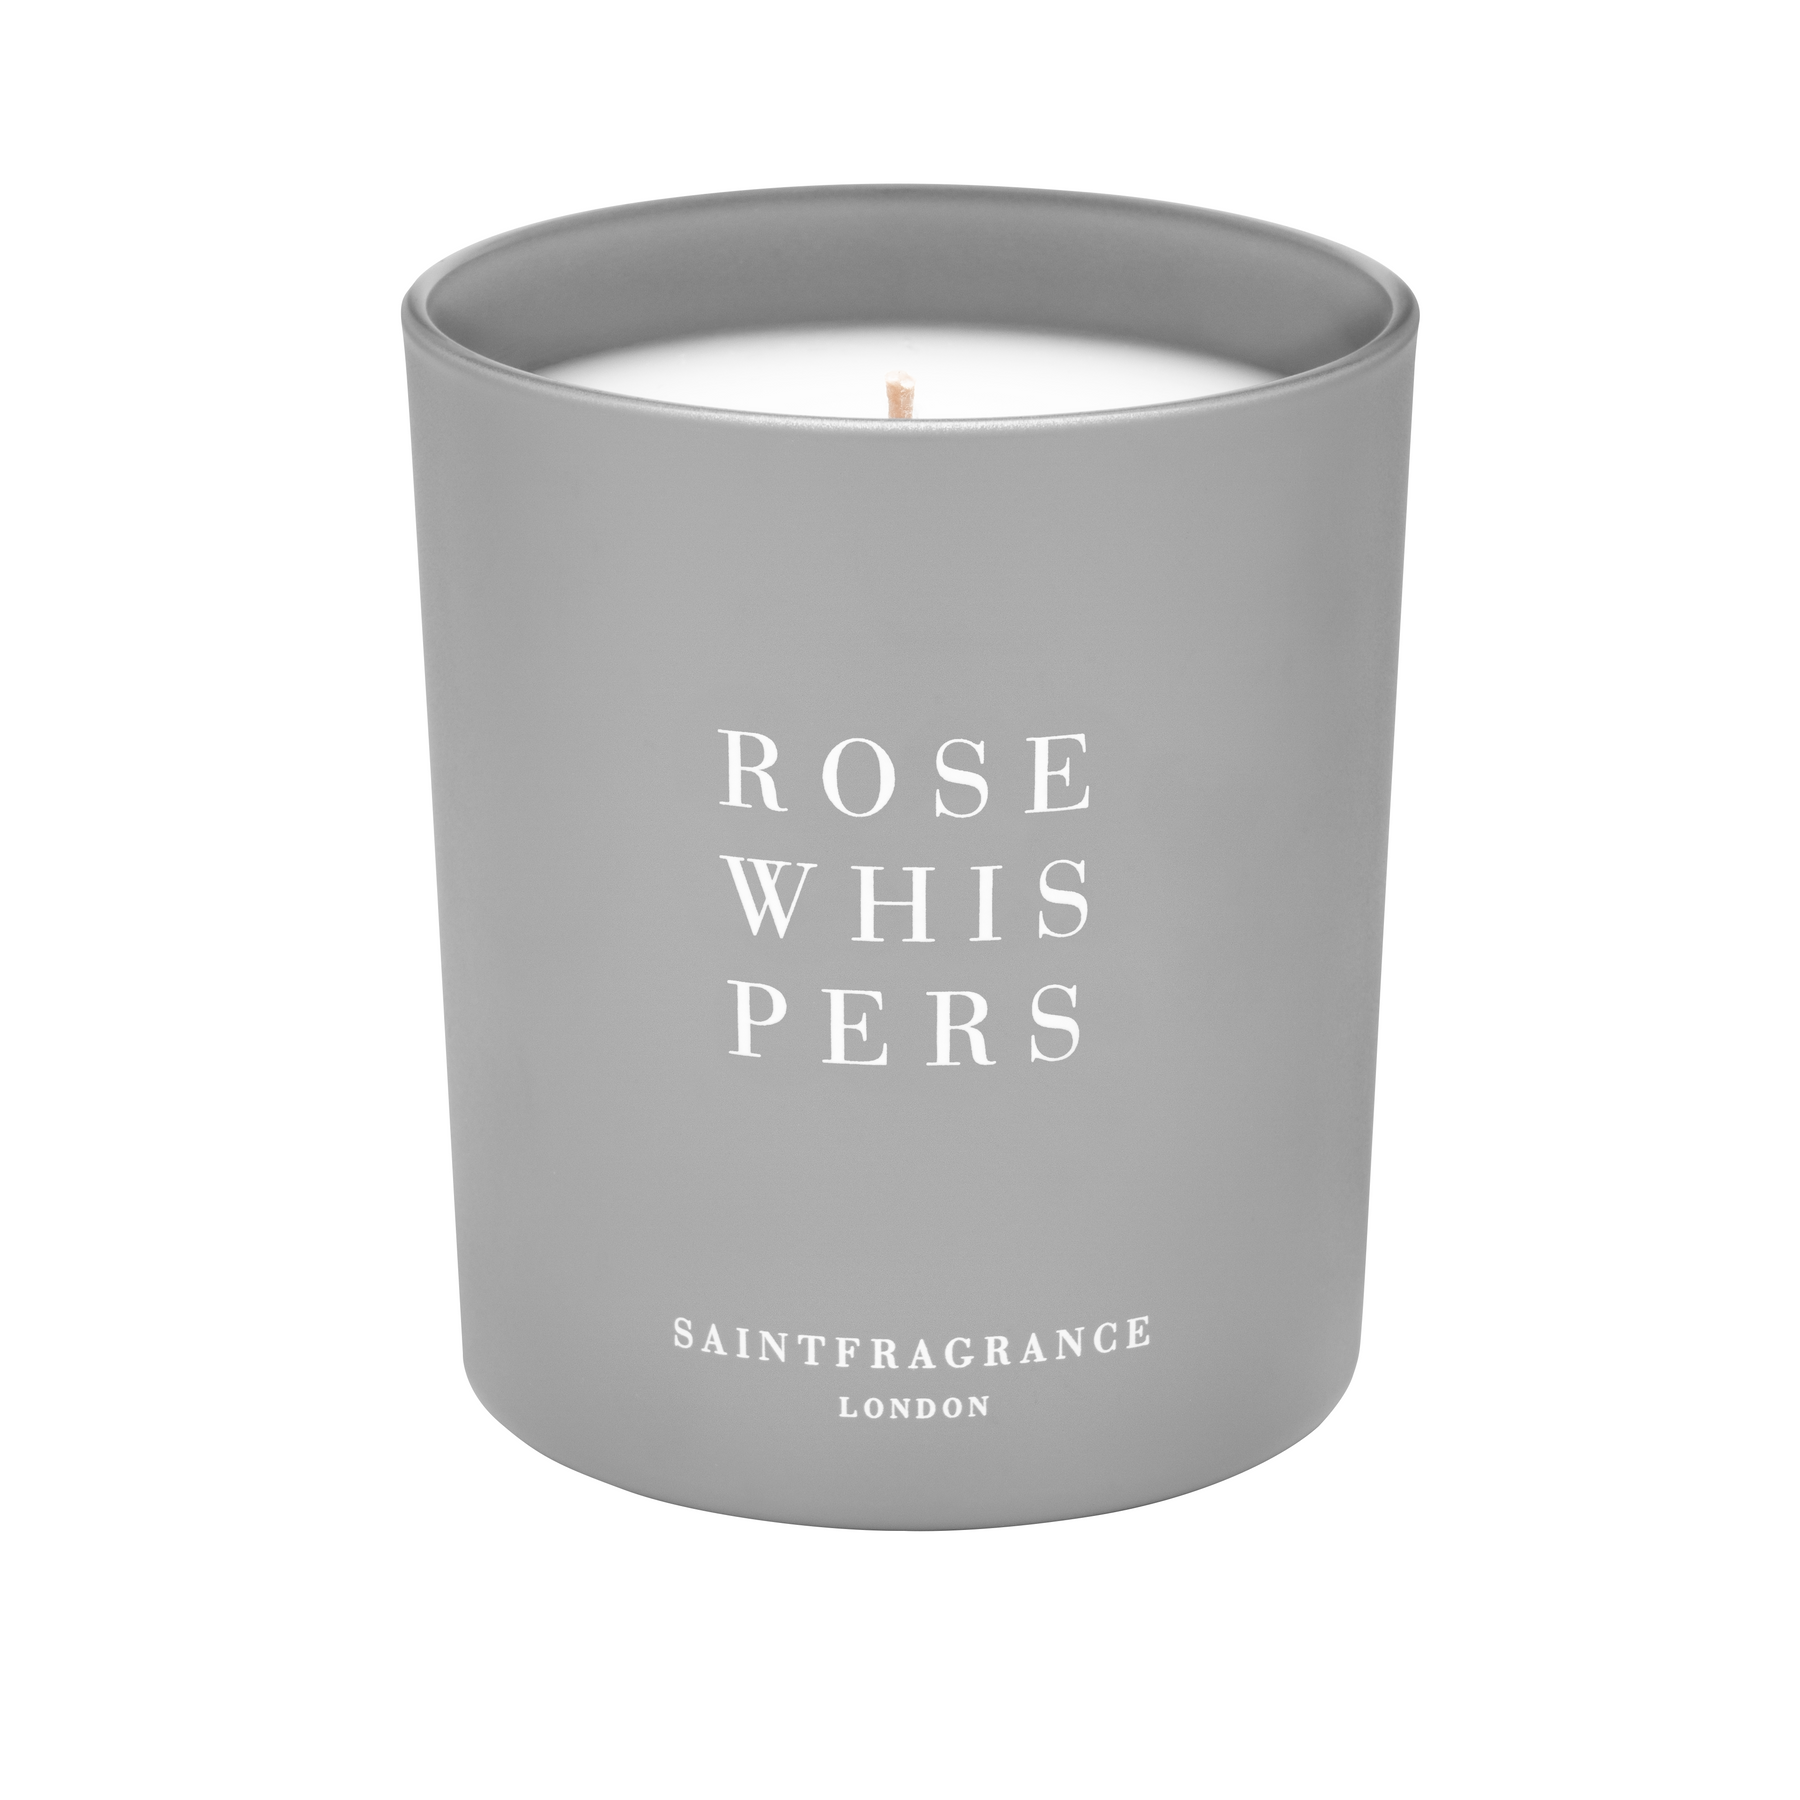 Rose Whispers ~ rose, lychee, patchouli